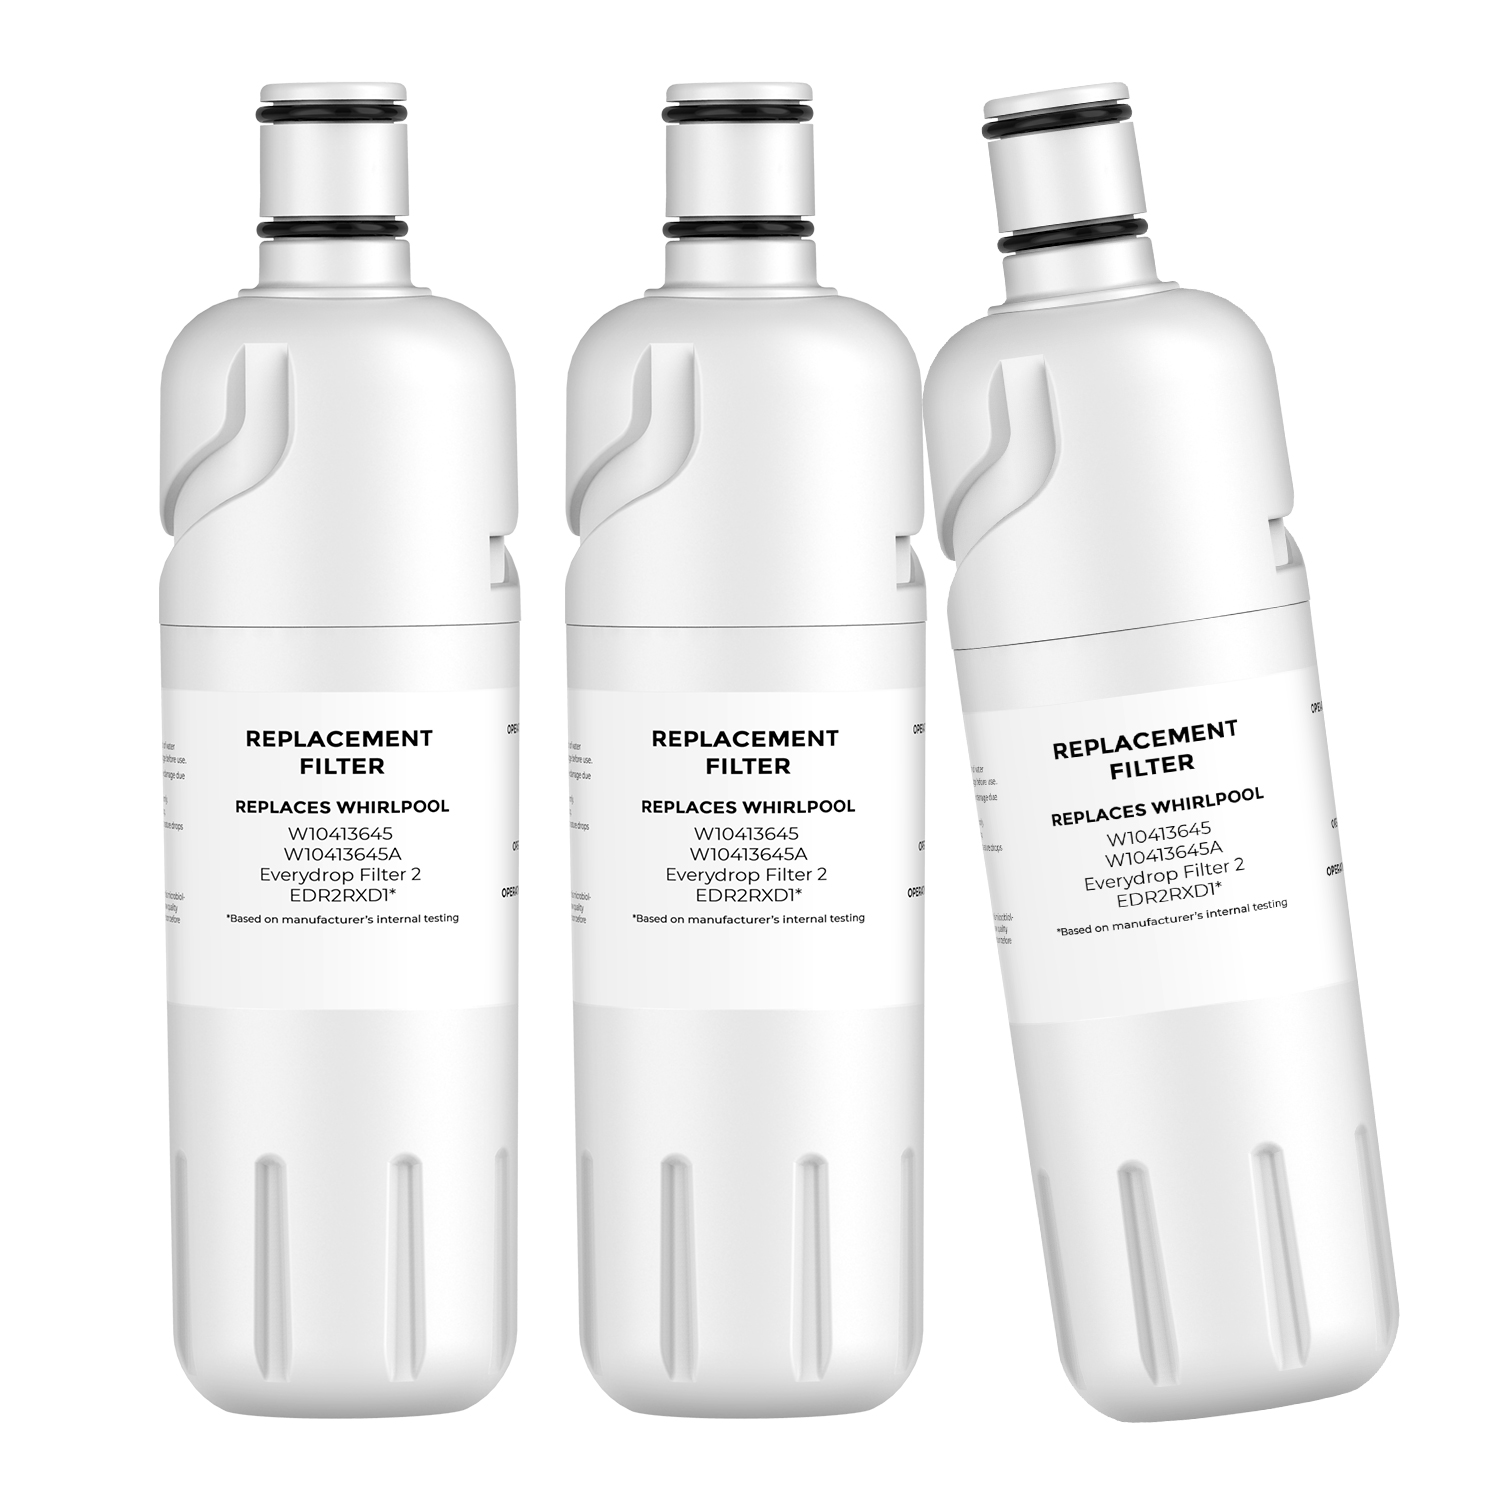 Compatible EDR2RXD1,W10413645,9082 refrigerator water filter 2 by Pzfilters 3PK